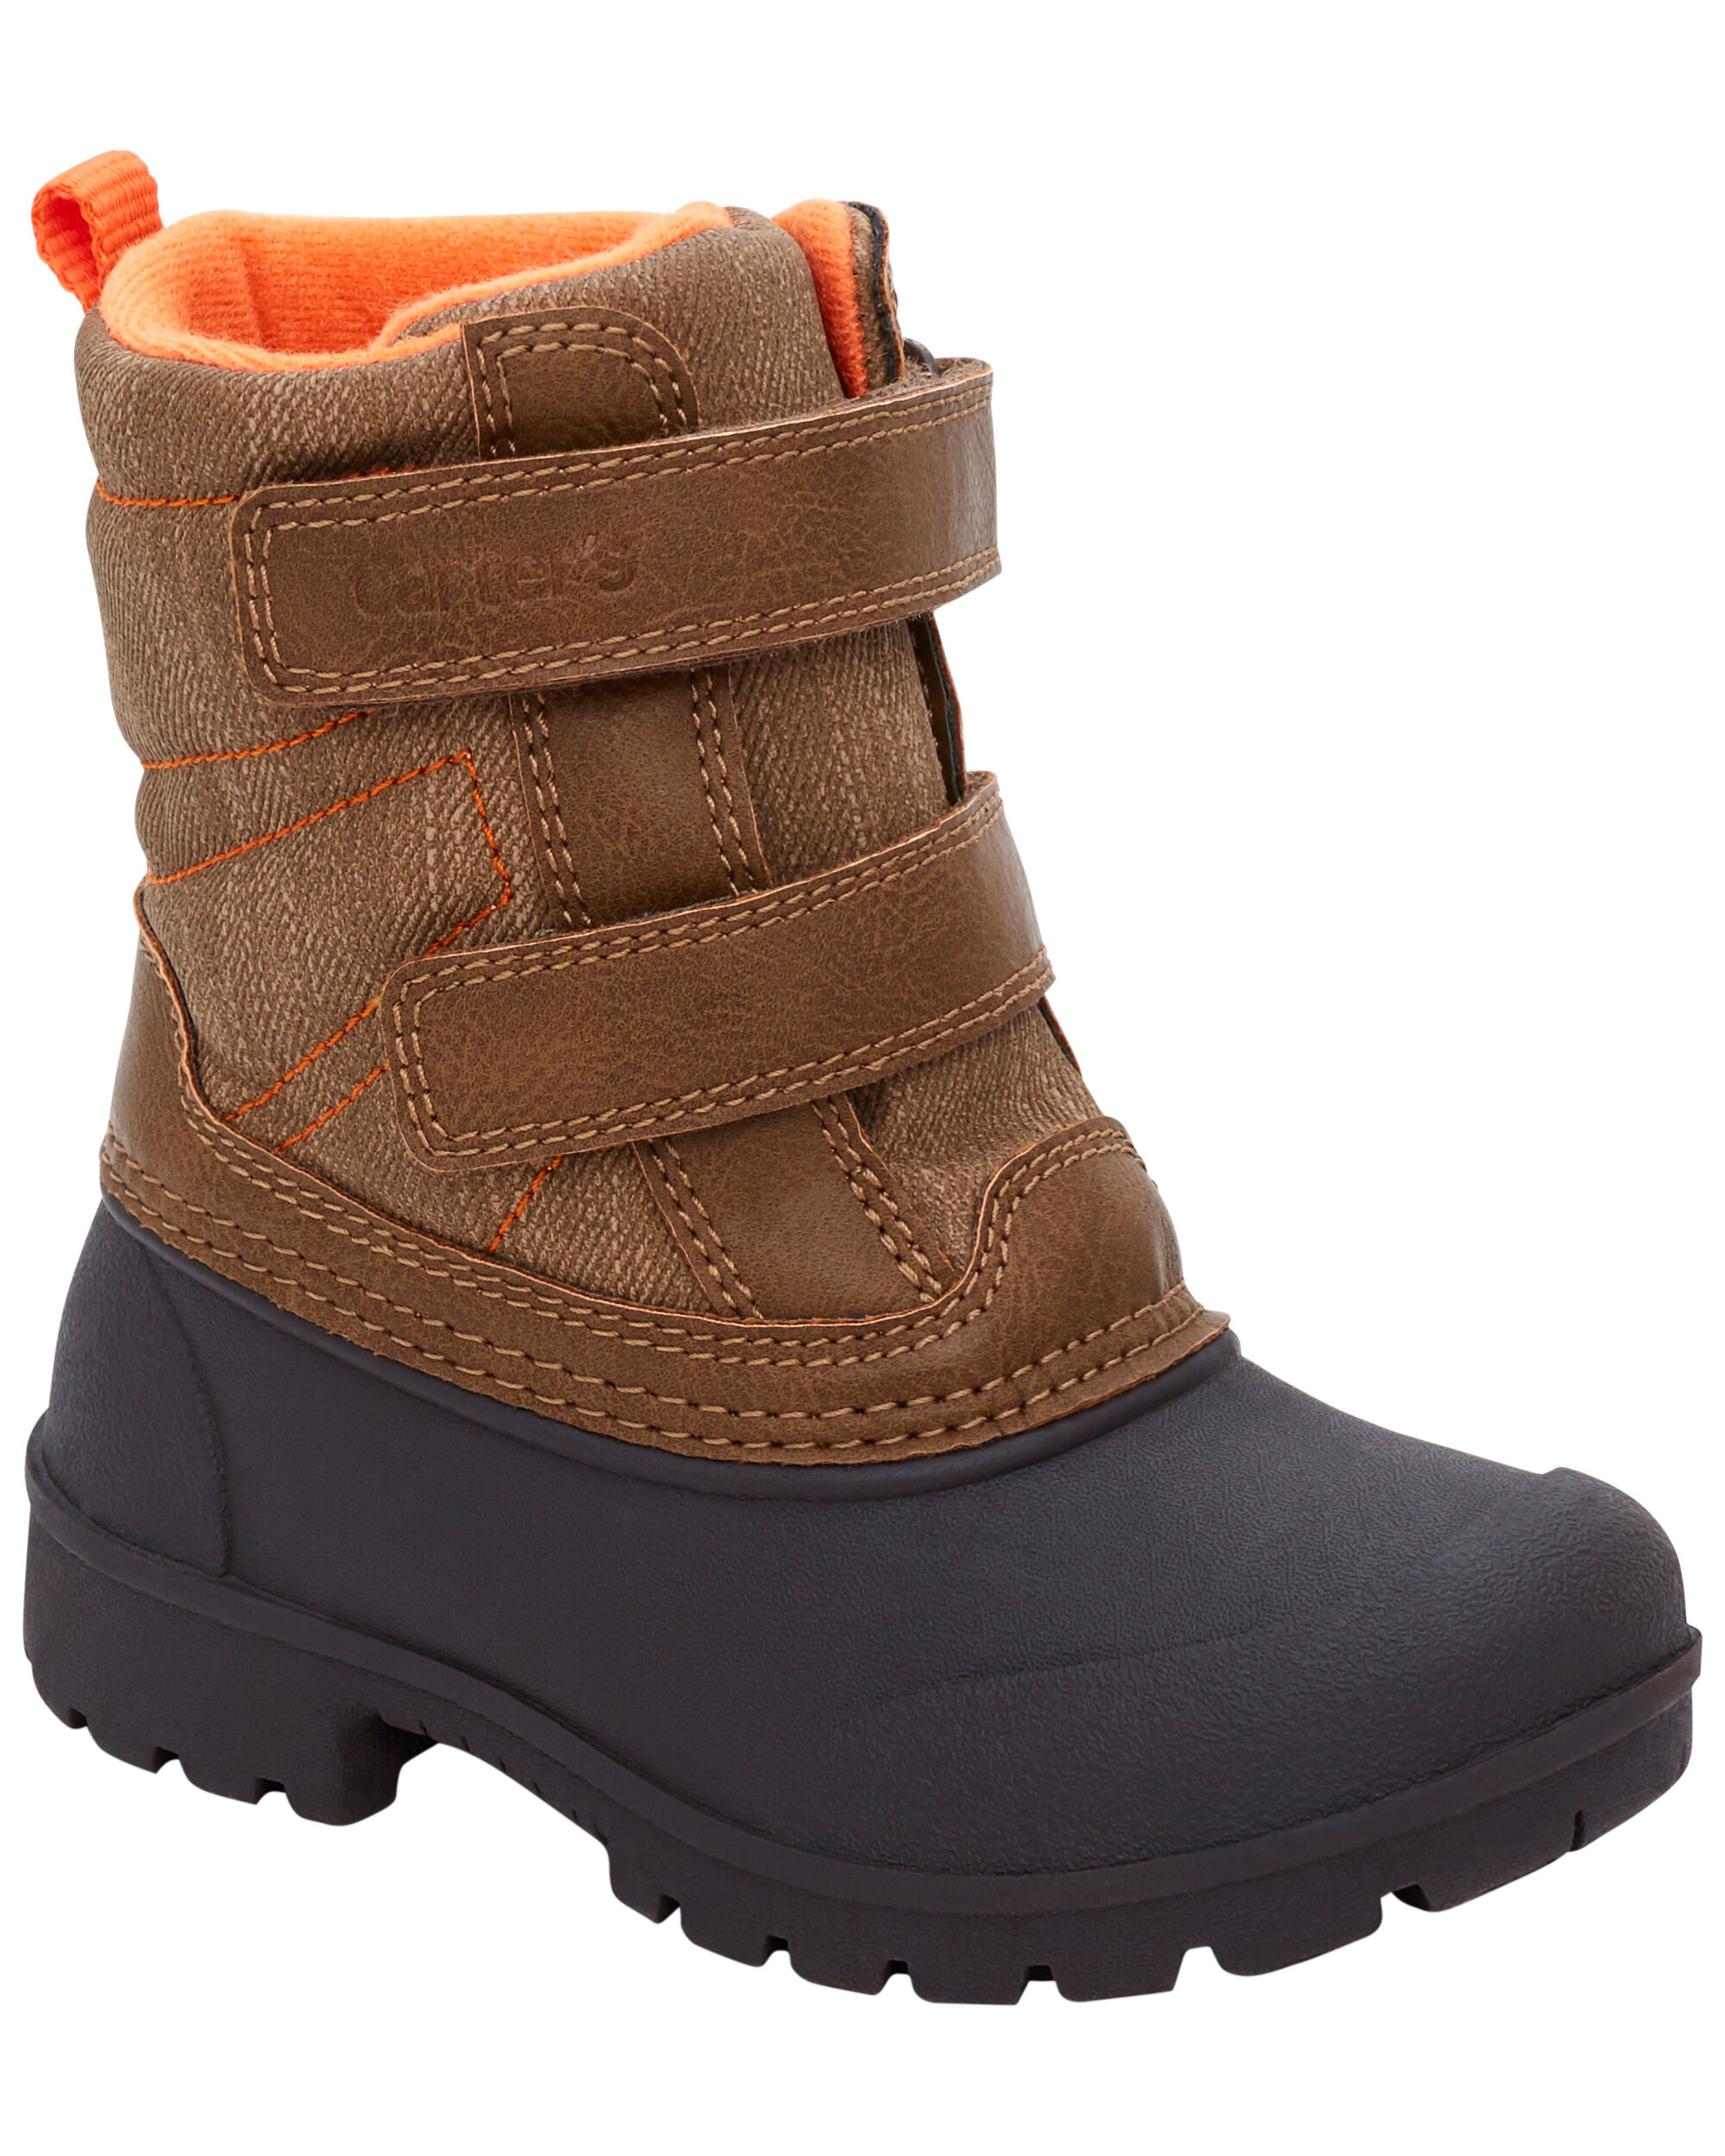 Navy 9 M US Toddler Carters Boys New Boot 